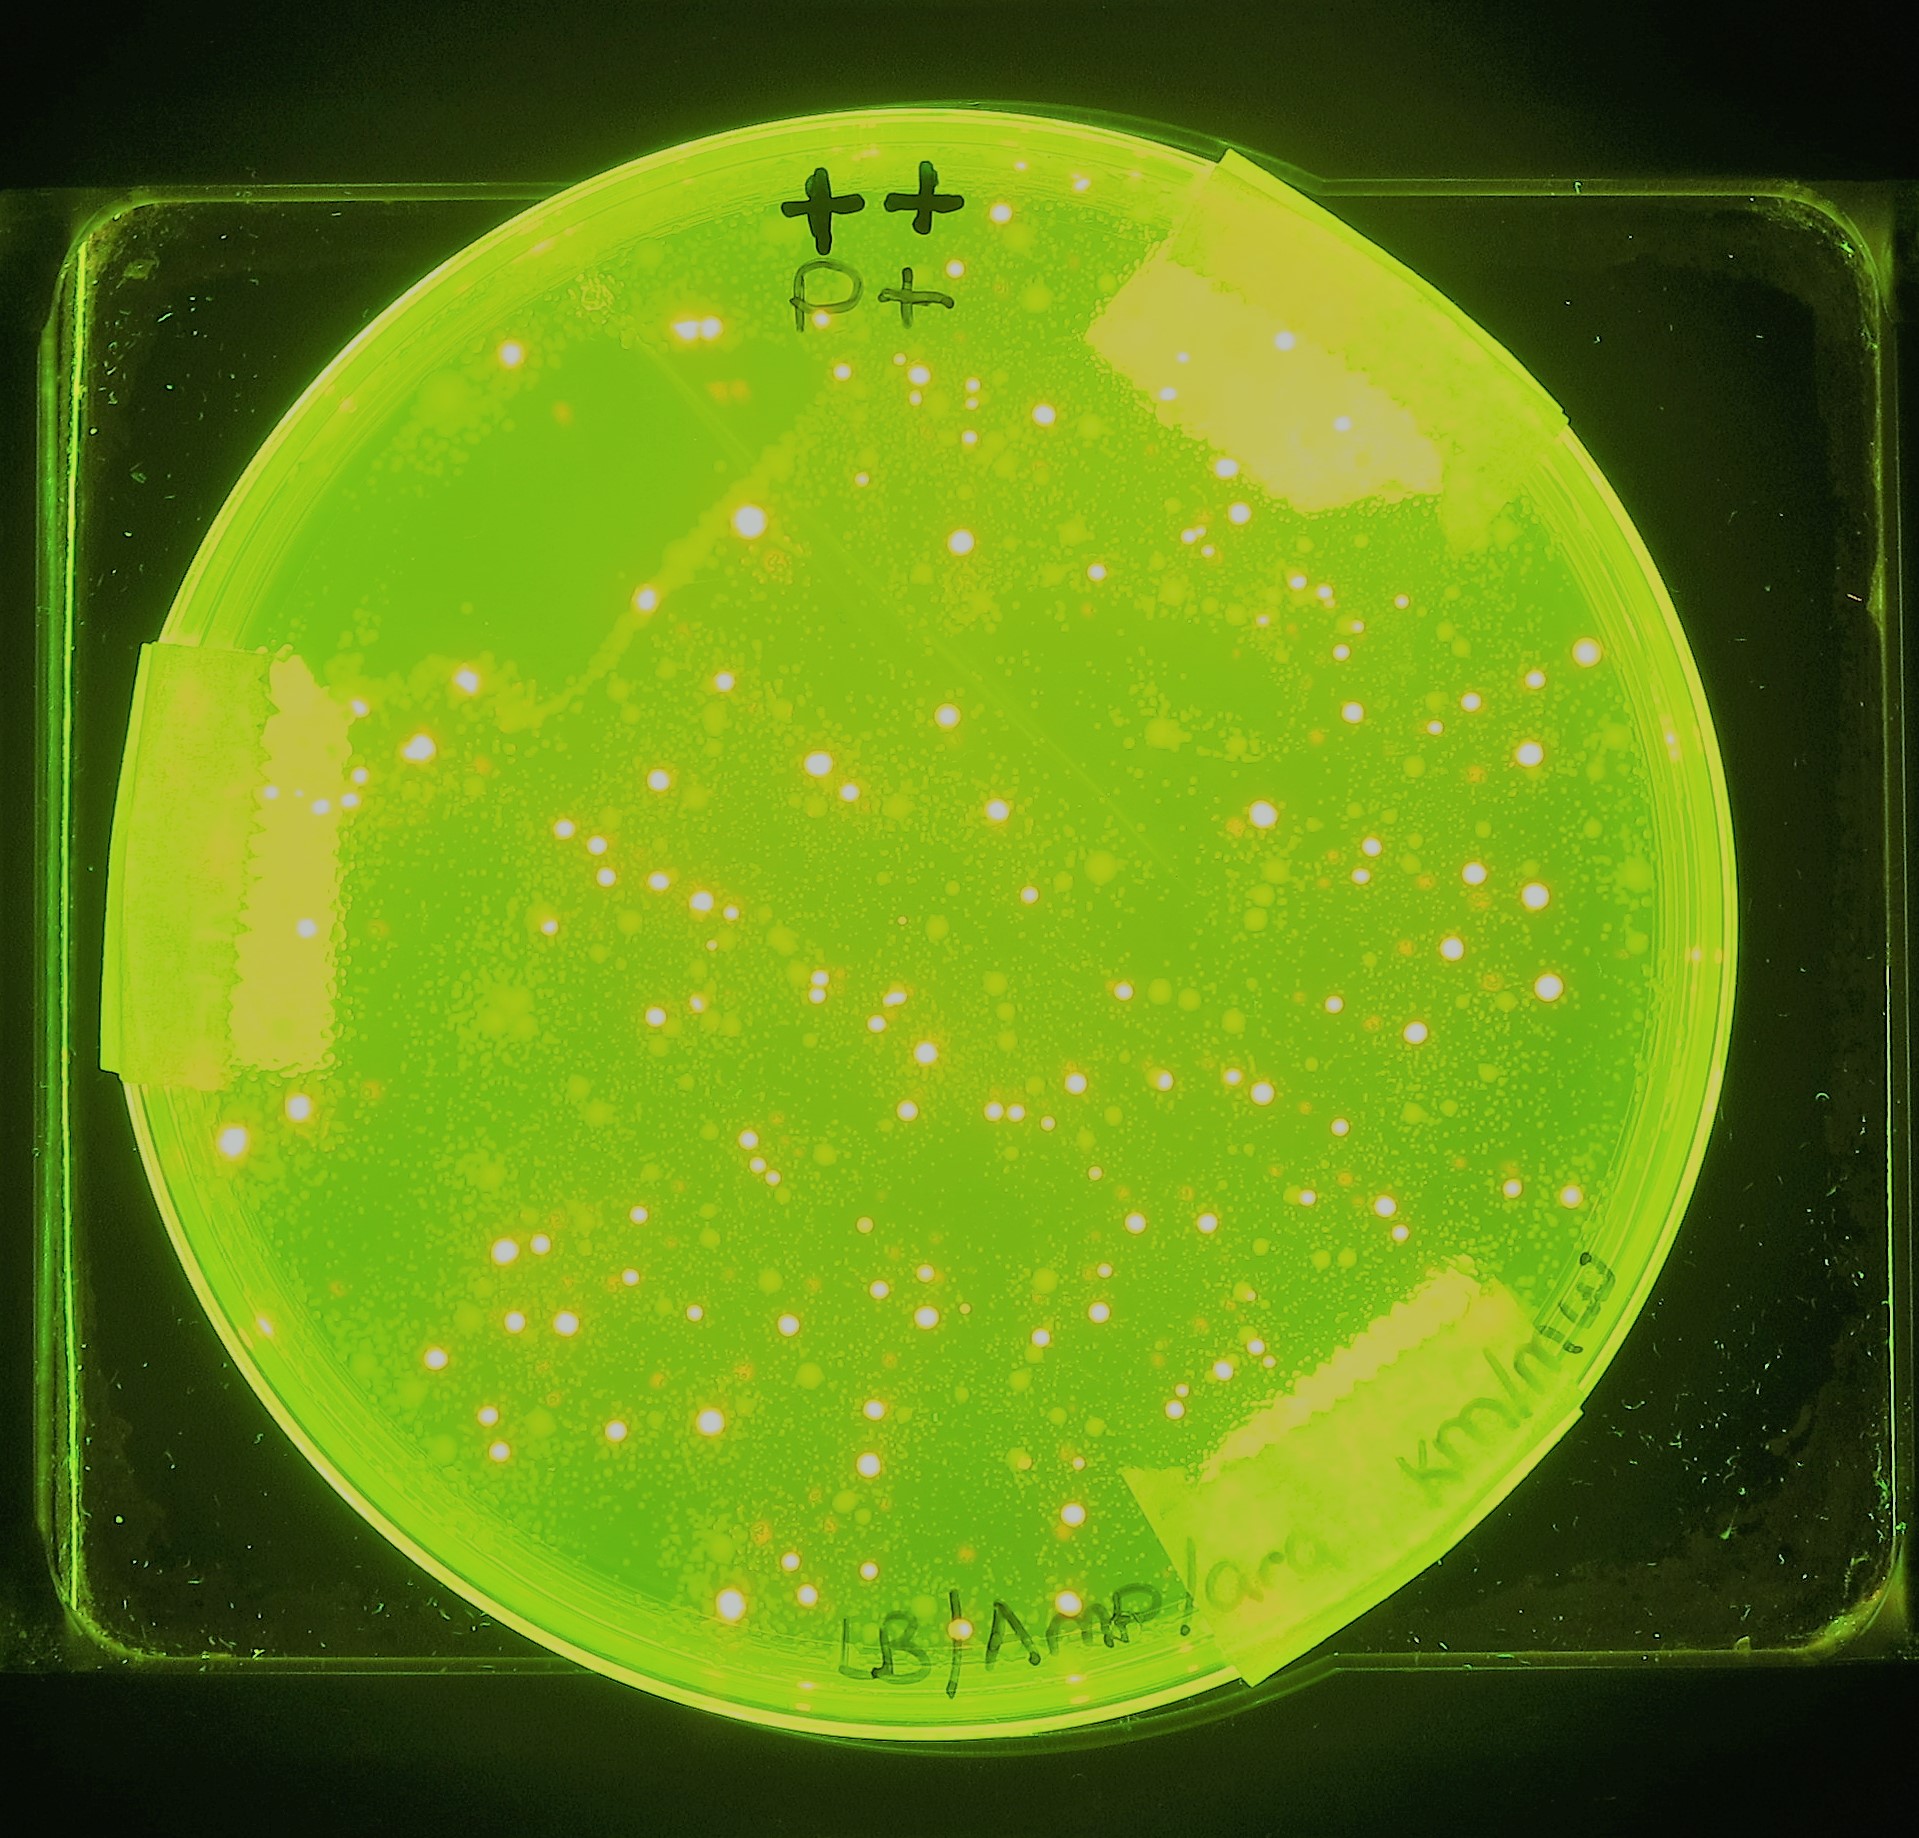 transformed bacterial cells expresing rfp and fluorescing